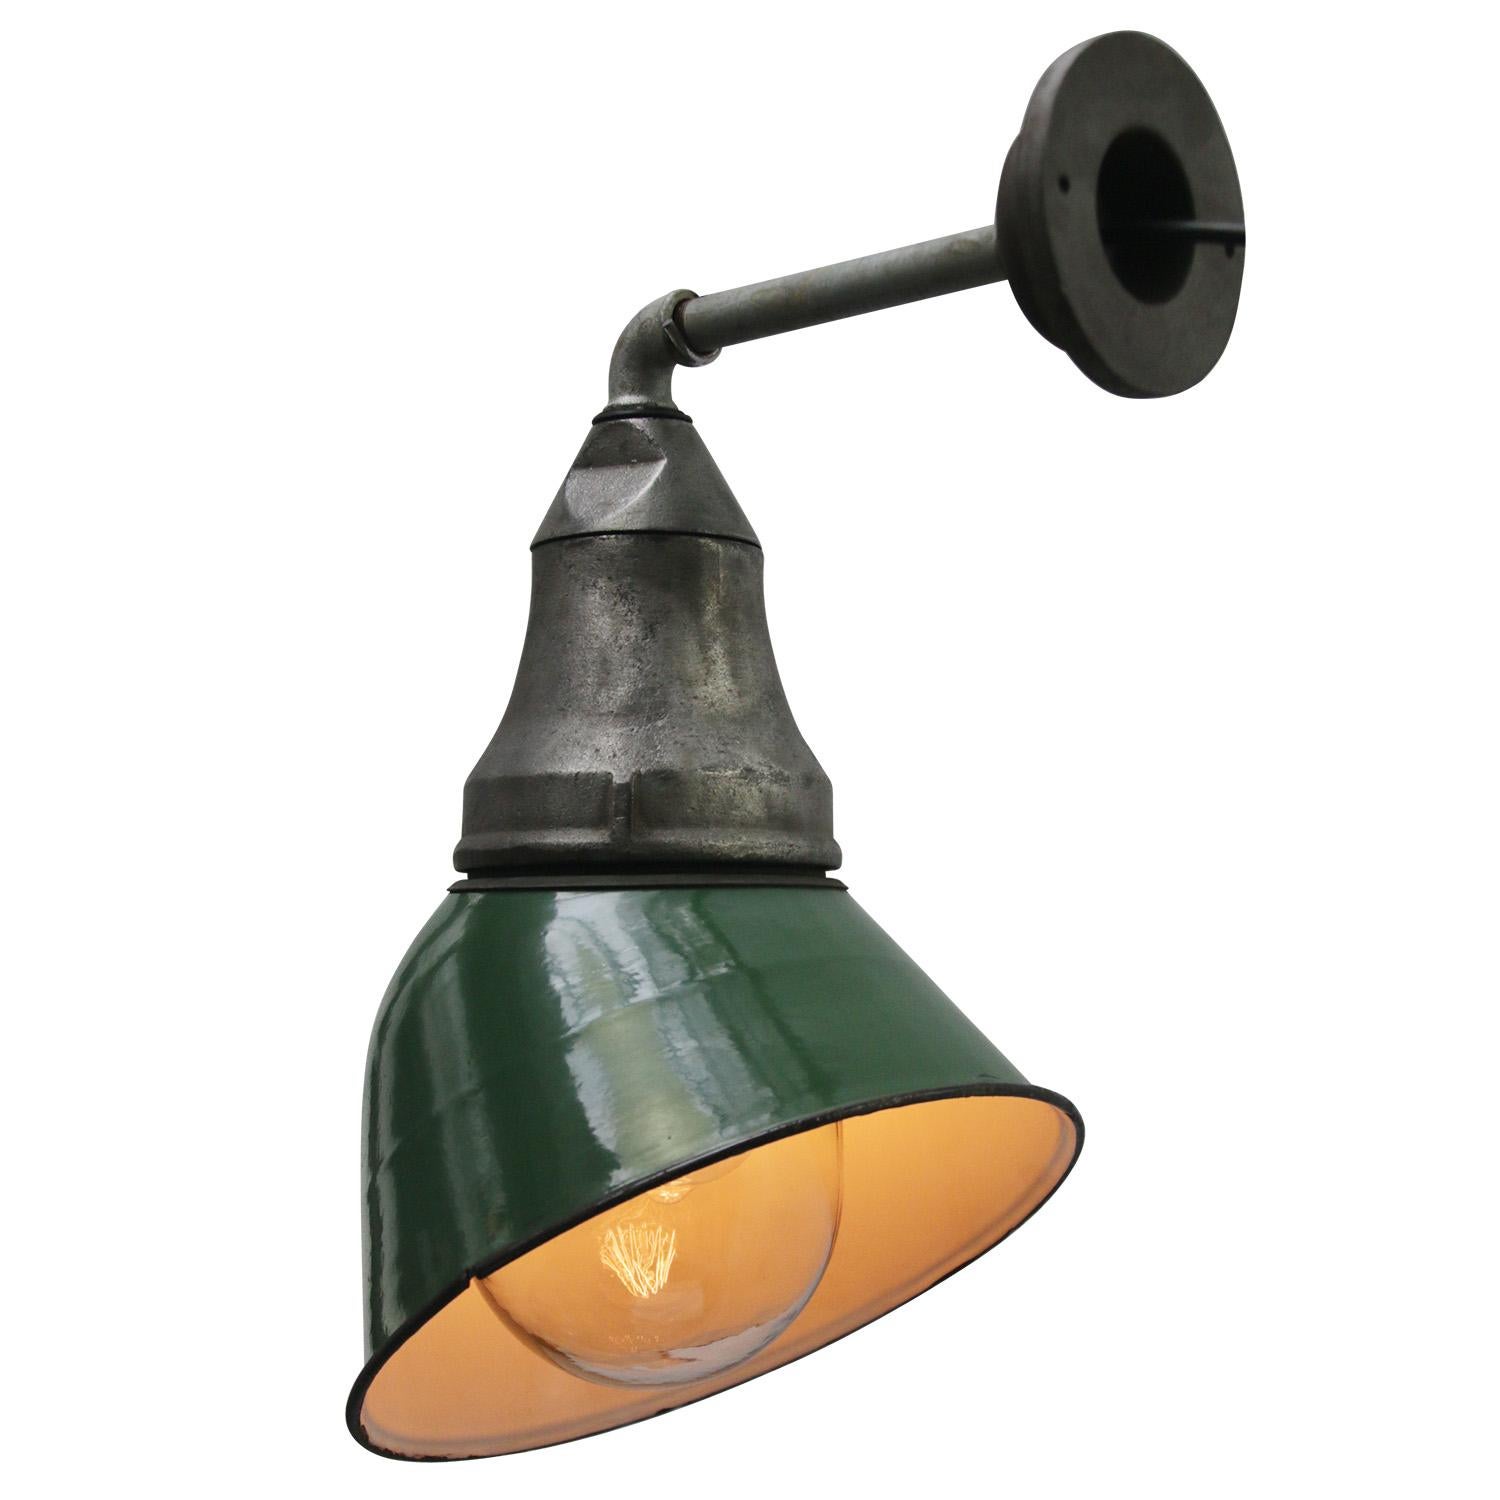 American Vintage industrial wall light
Green enamel, cast aluminium and iron top / wall base
Clear glass

Diameter wall mount 10.5 cm / 4”.

E27/E26

Weight: 4.30 kg / 9.5 lb

Priced per individual item. All lamps have been made suitable by